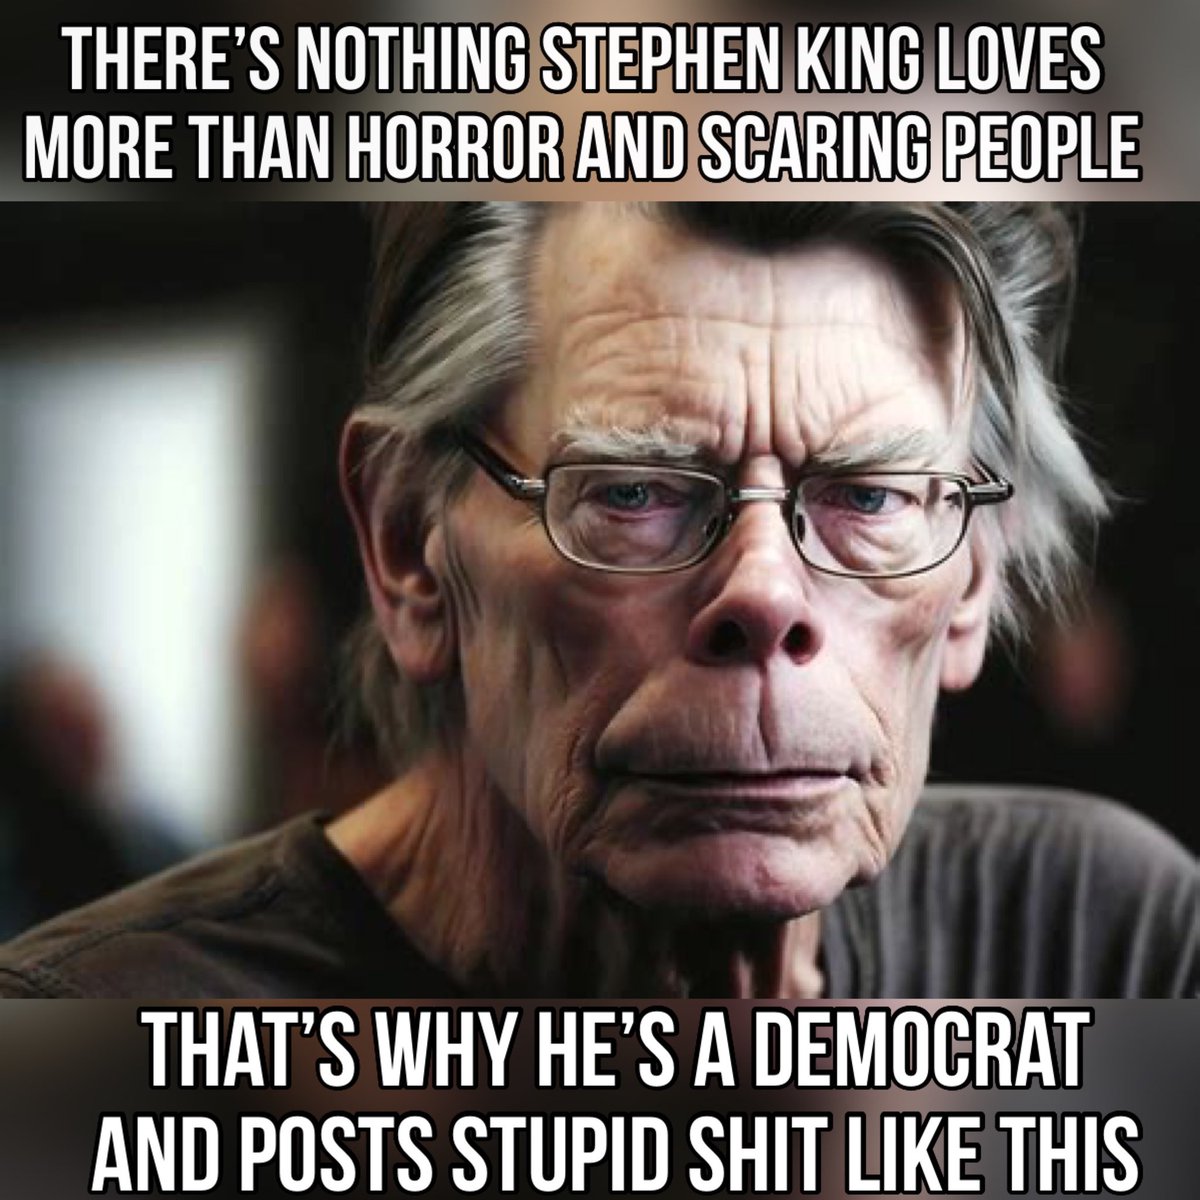 @StephenKing You’re Biden’s last fan, everyone else can’t stand him